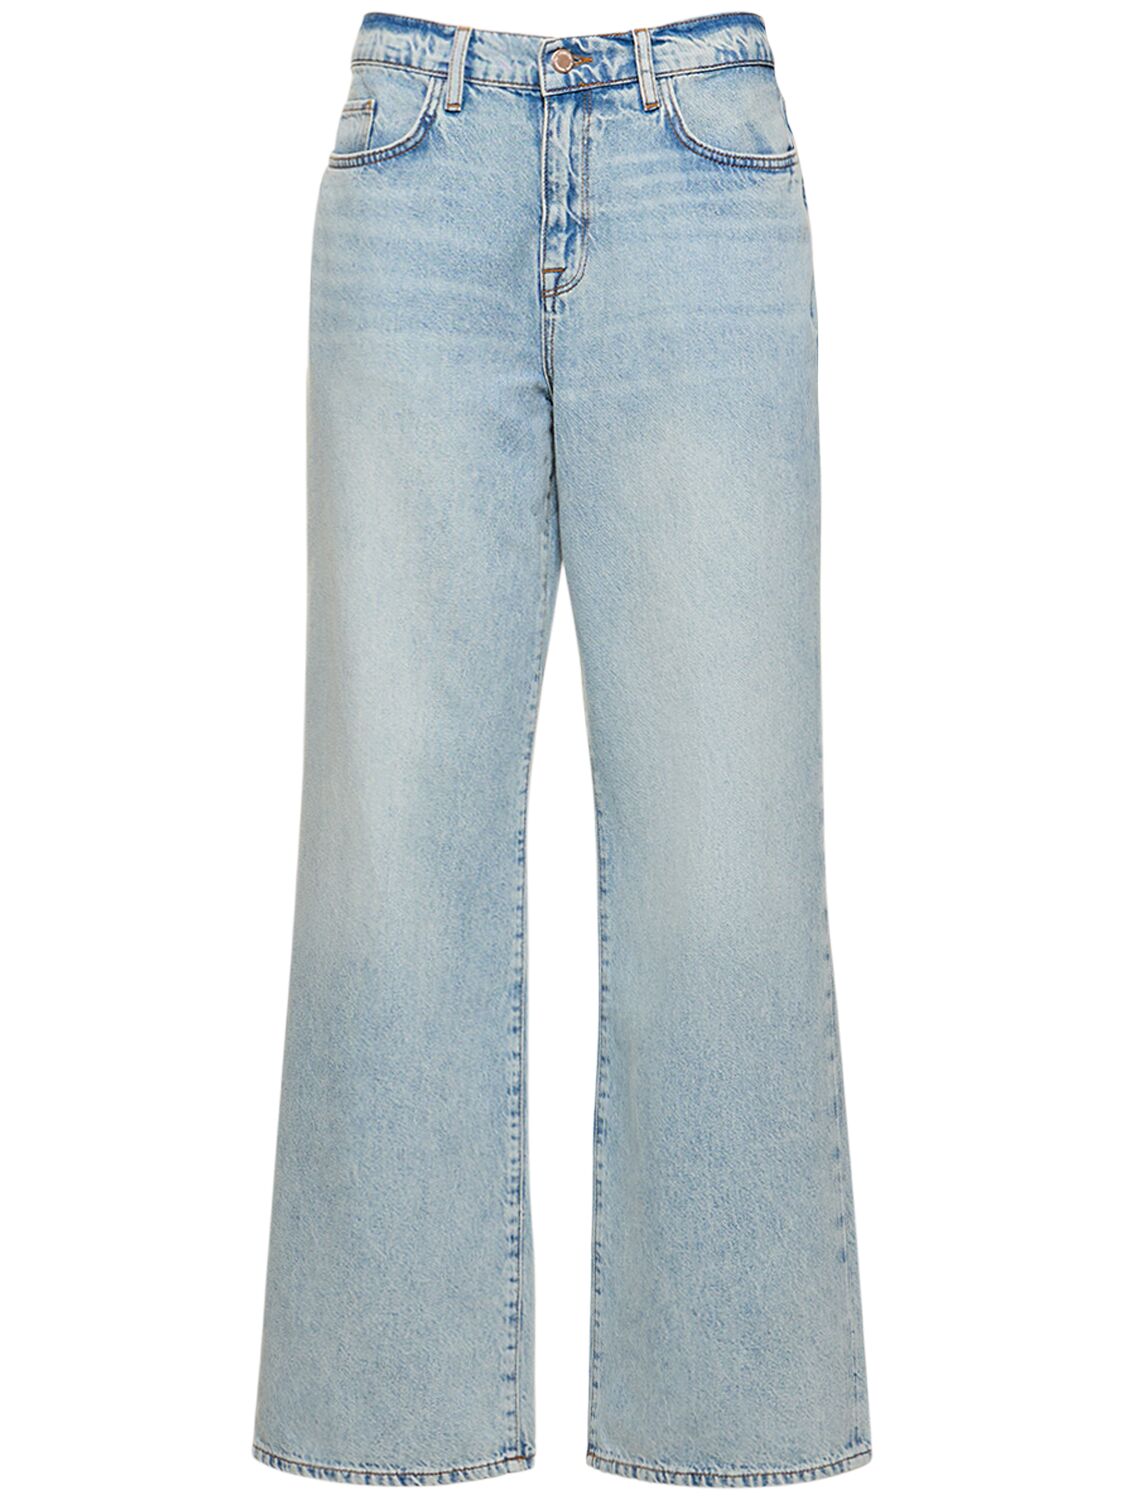 Ms. Miley Mid-rise Baggy Cotton Jeans - TRIARCHY - Modalova